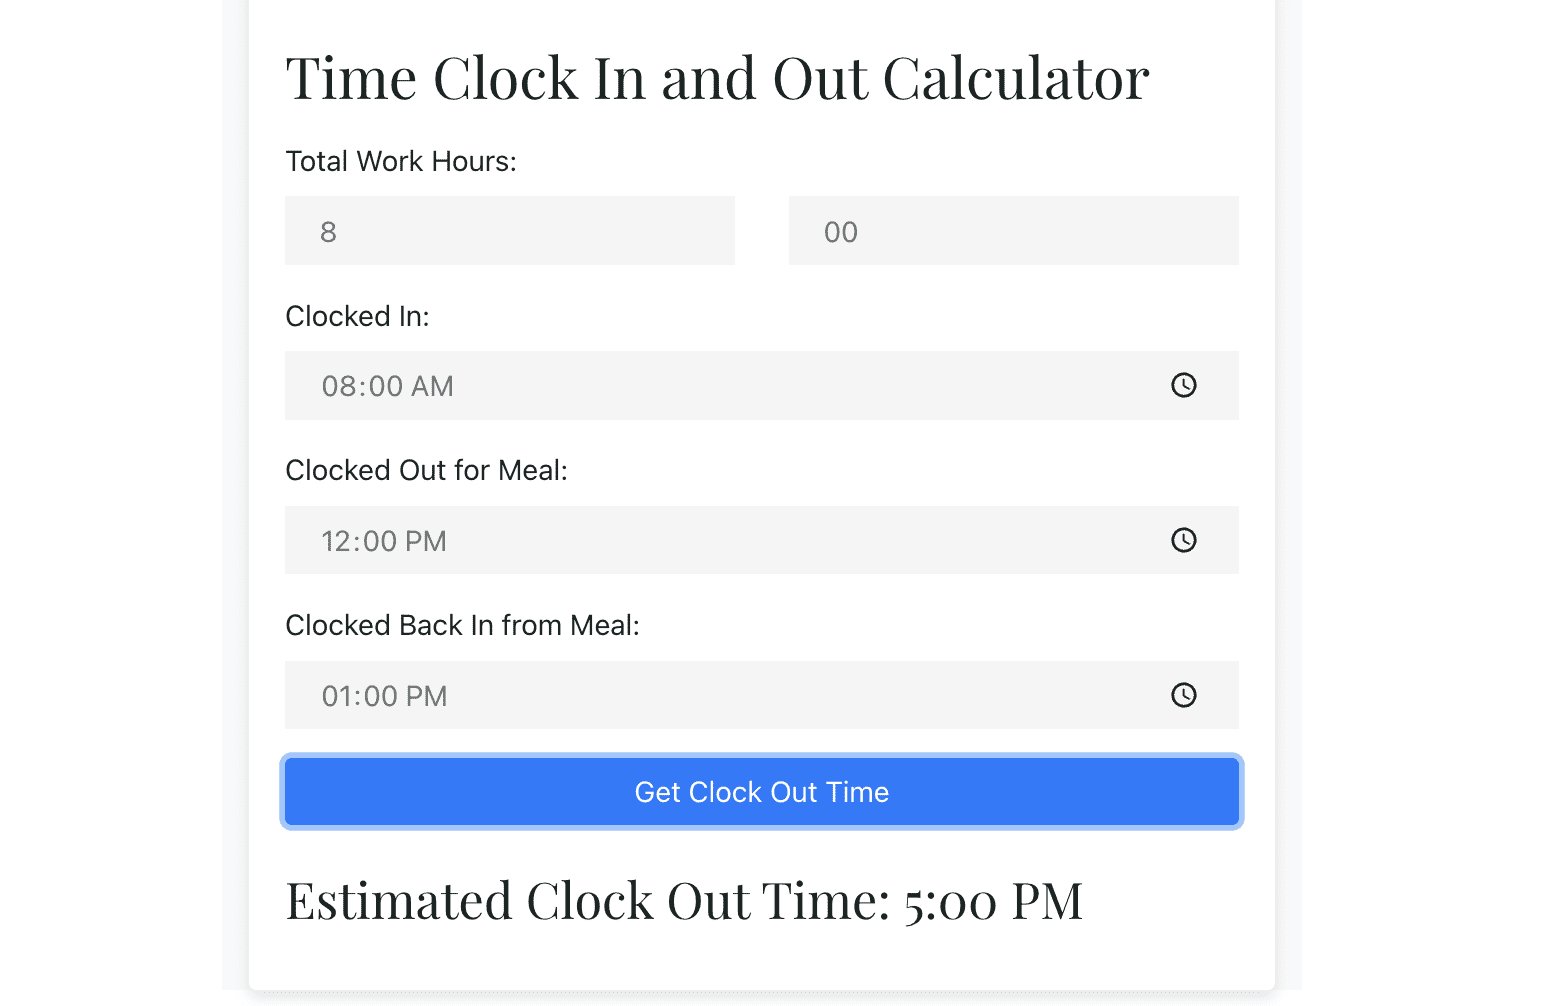 Time Clock In and Out Calculator